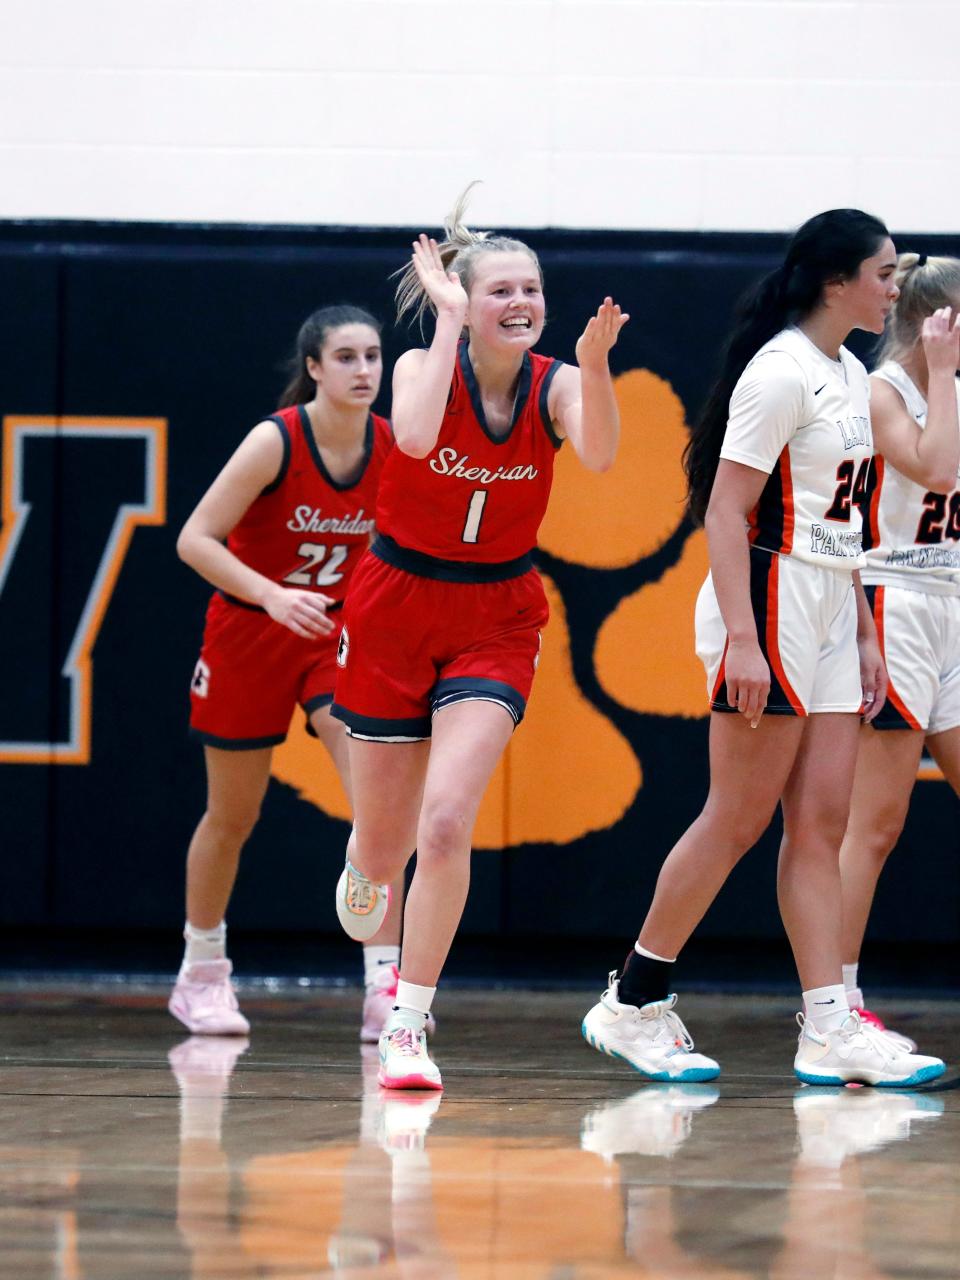 Jamisyn Stinson celebrates after Sheridan's 56-50 win against host New Lexington Wednesday night. The Generals used an 8-0 run in the fourth quarter to remain tied atop the Muskingum Valley League's Big School Division, as Stinson had a game-high 21 points.